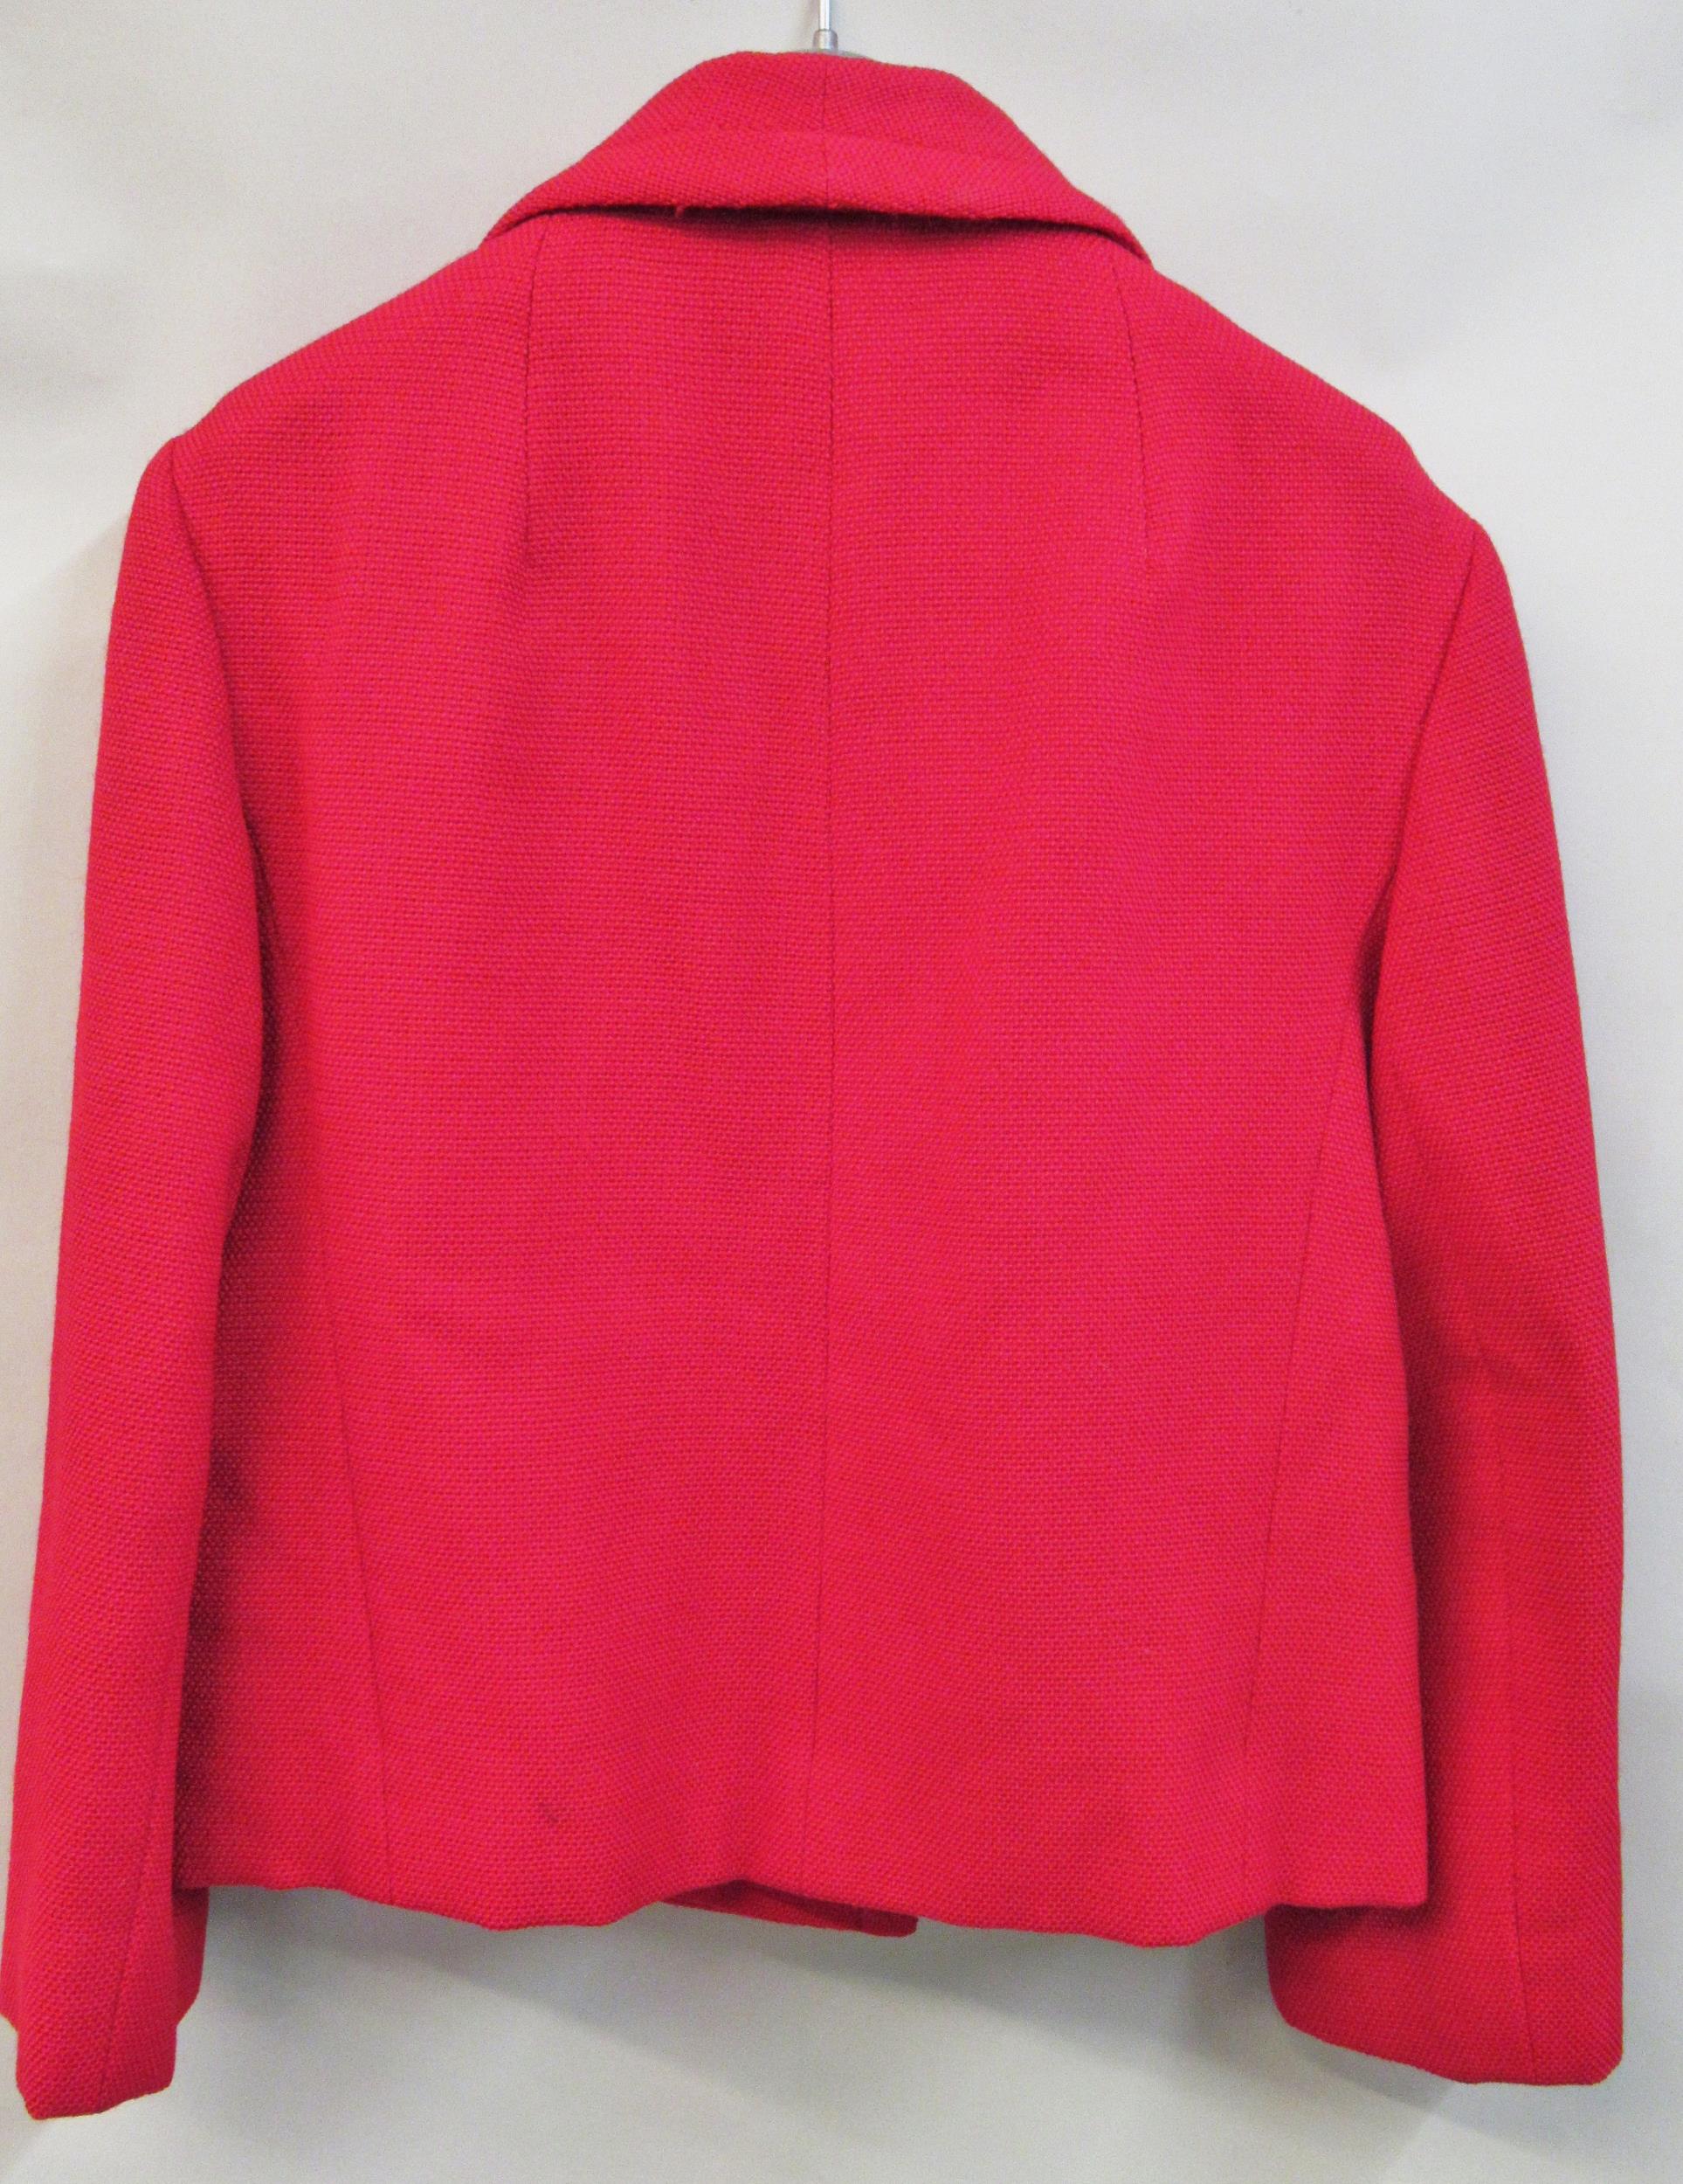 Christian Dior for Harrods, ladies red jacket, size 12 Has a couple of minor pulls and a very - Image 3 of 6